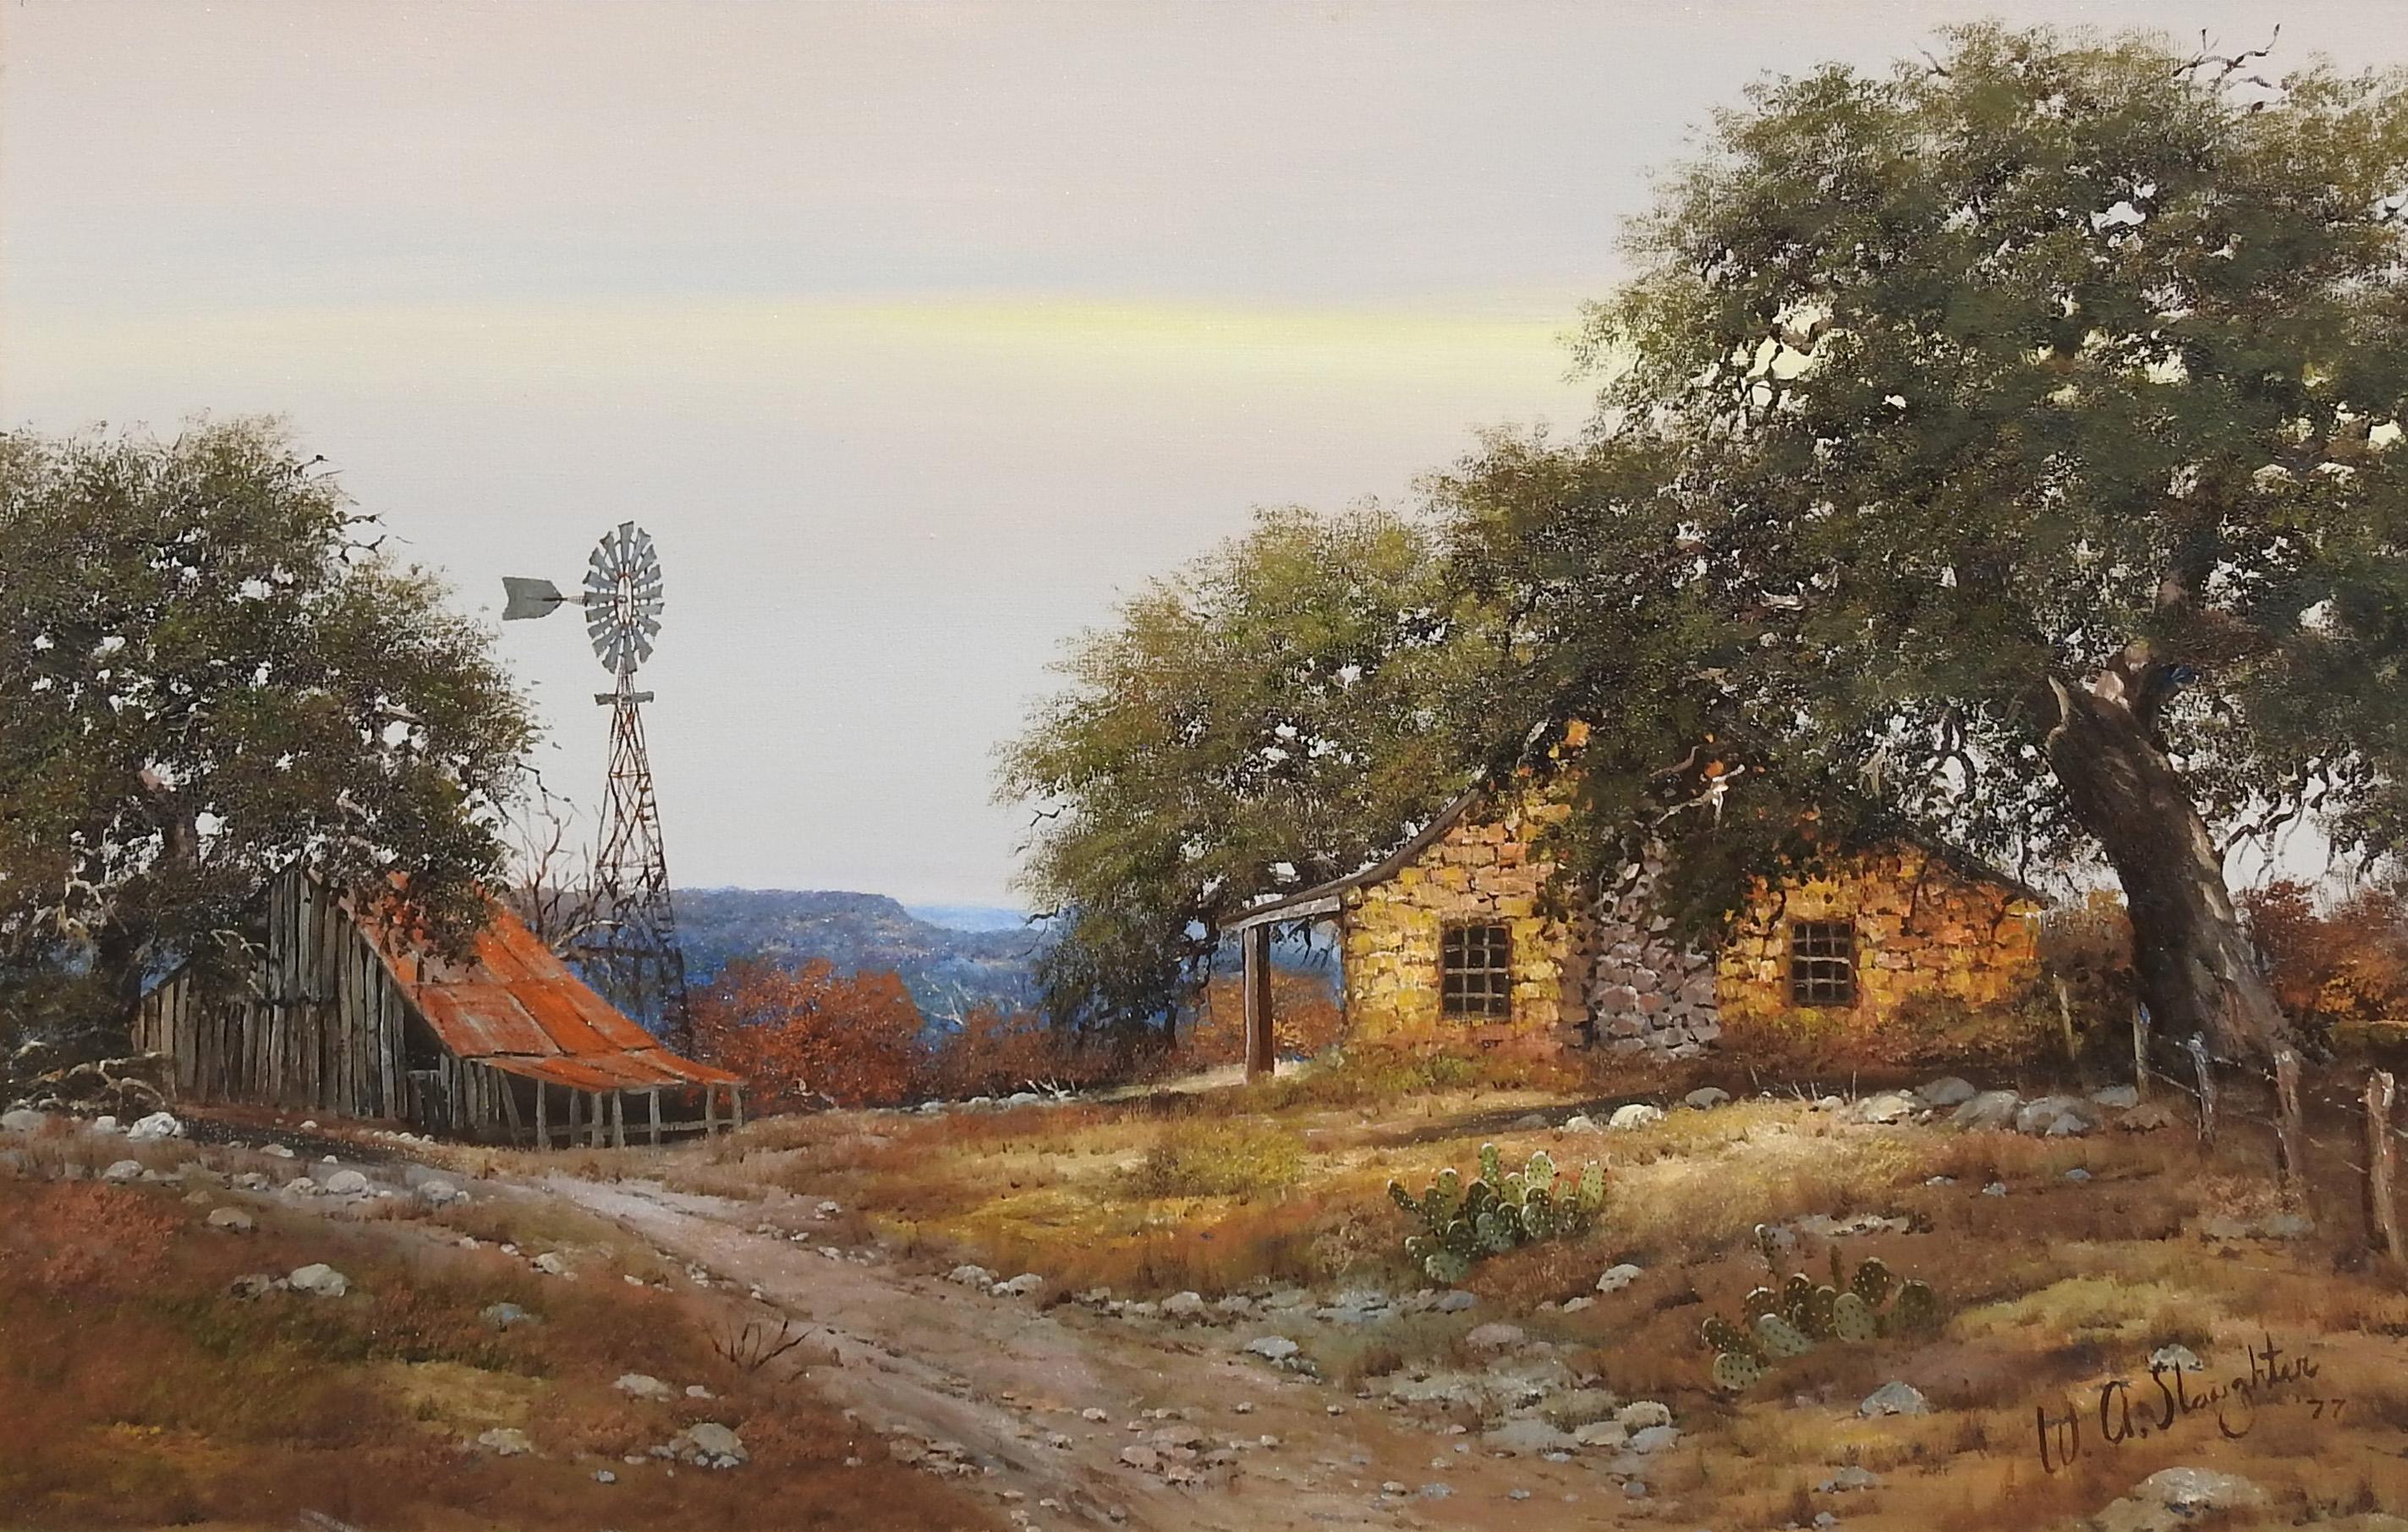 "Stone House & Windmill", W.A. Slaughter, Original, Oil on Canvas, 24x36 in.